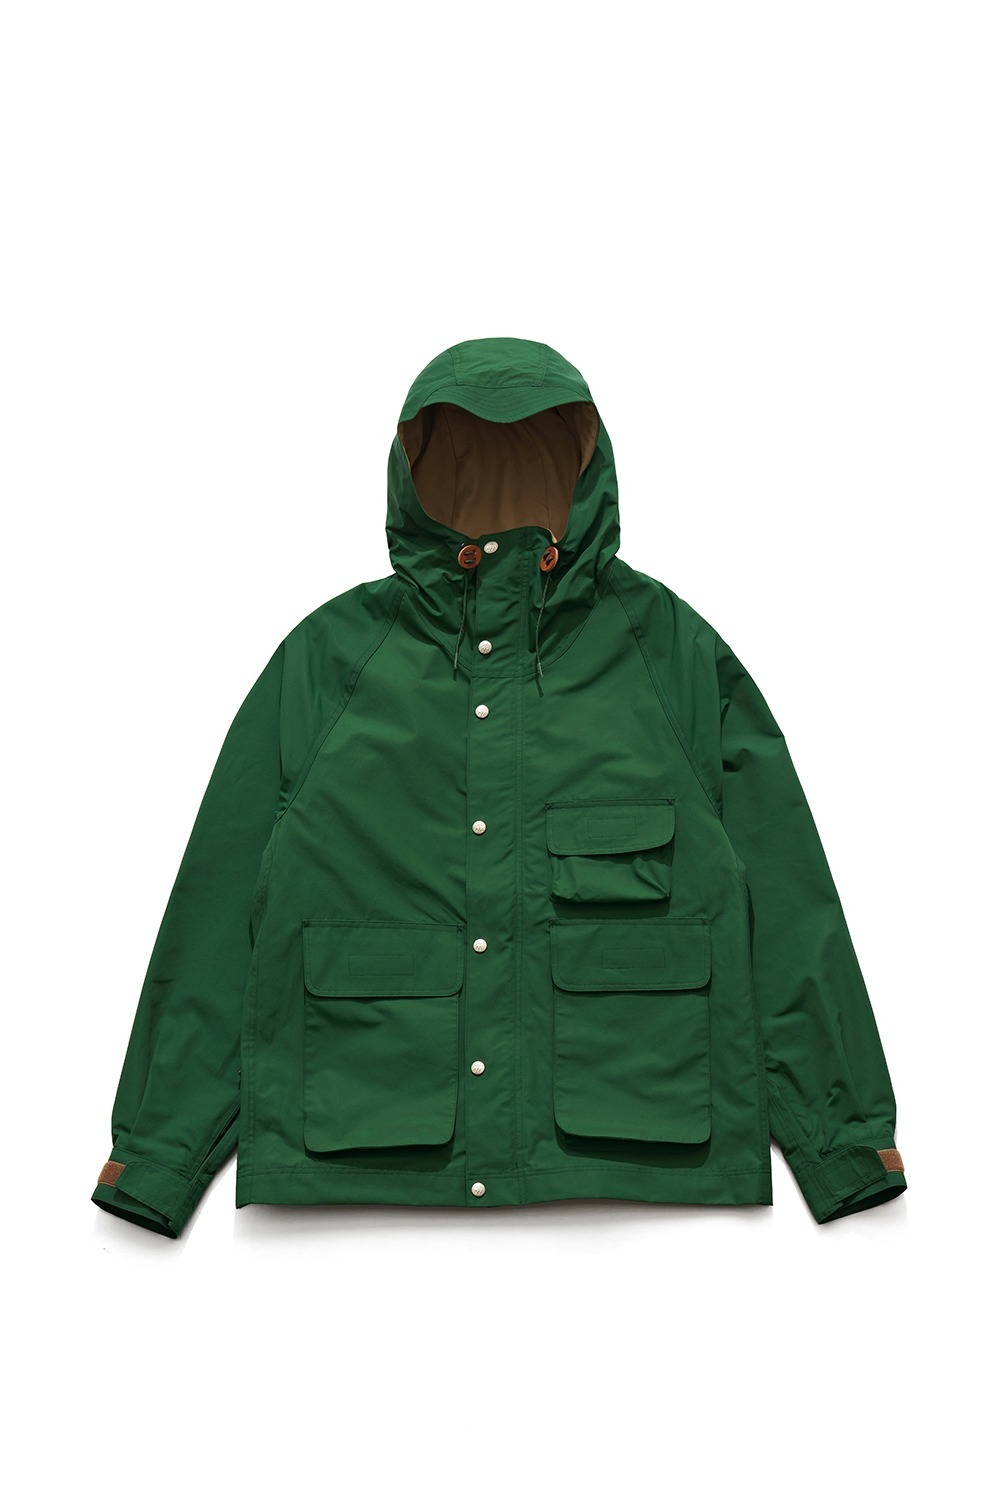 [EASTLOGUE X BROOKS BROTHERS] MOUNTAIN PARKA / GREEN